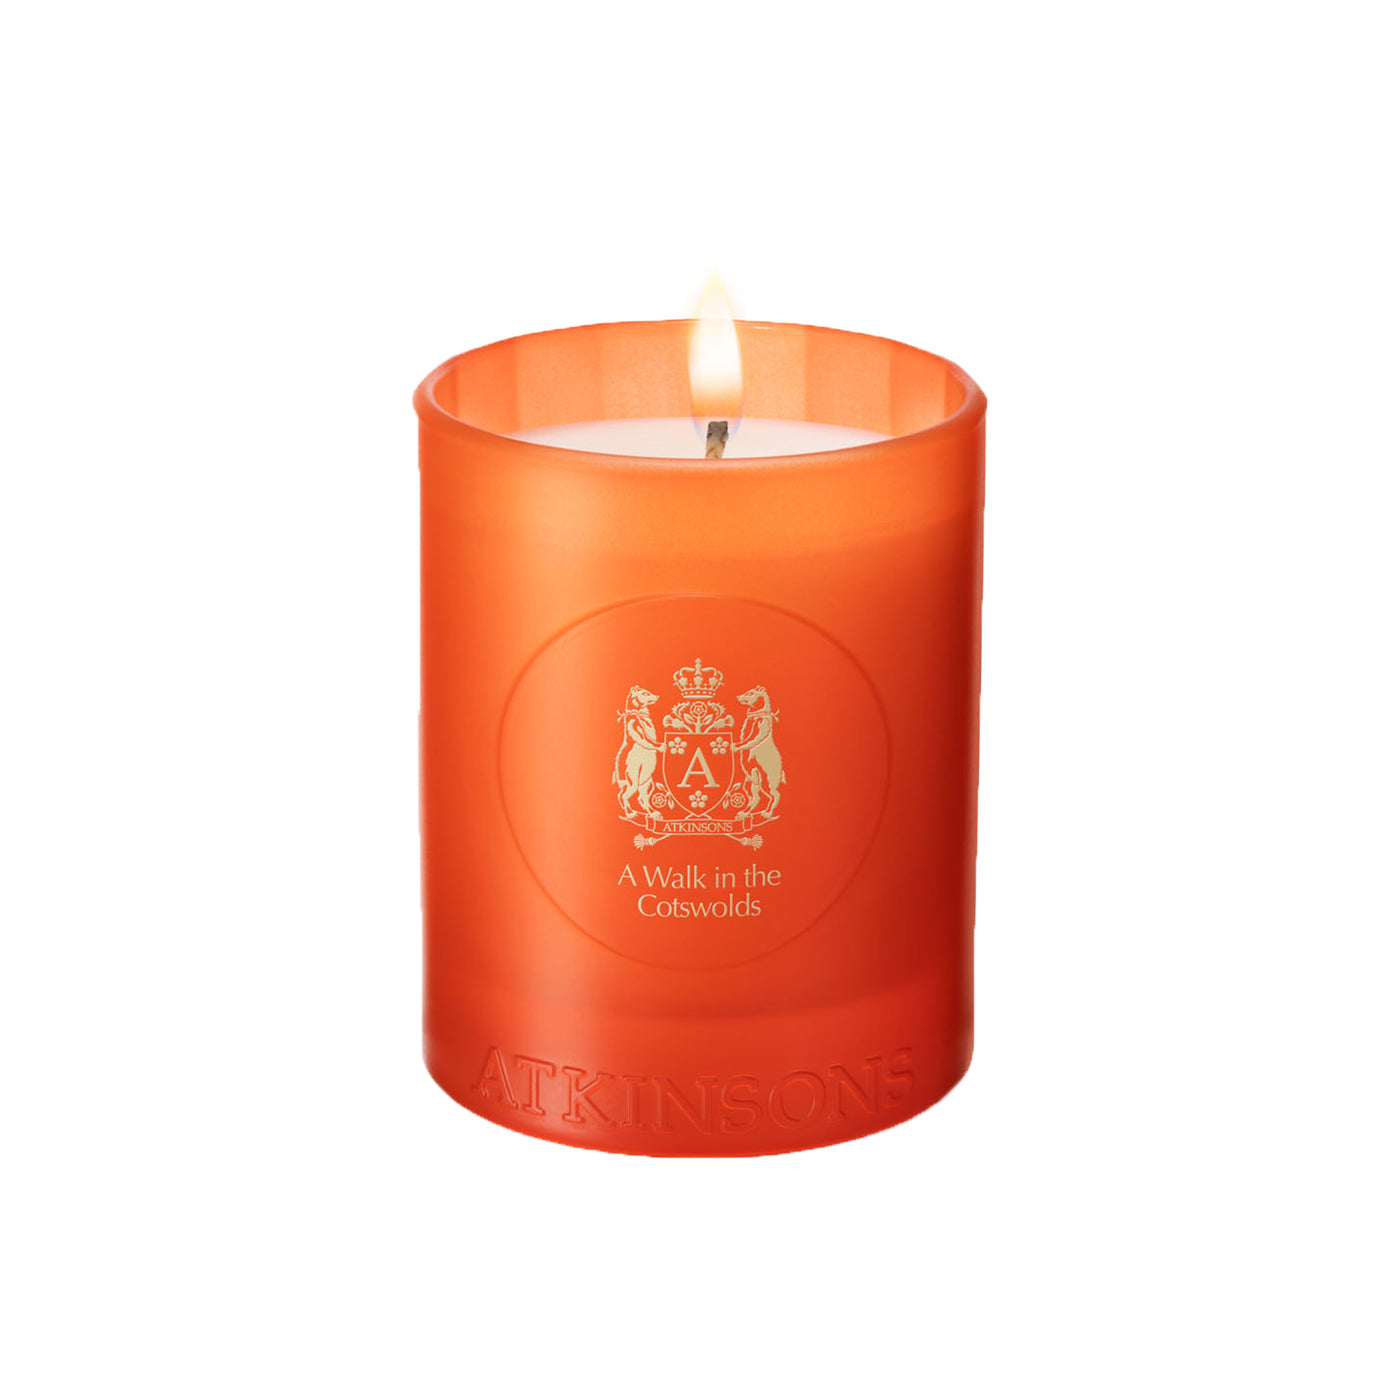 Atkinsons A Walk in the Cotswolds Candle 200g